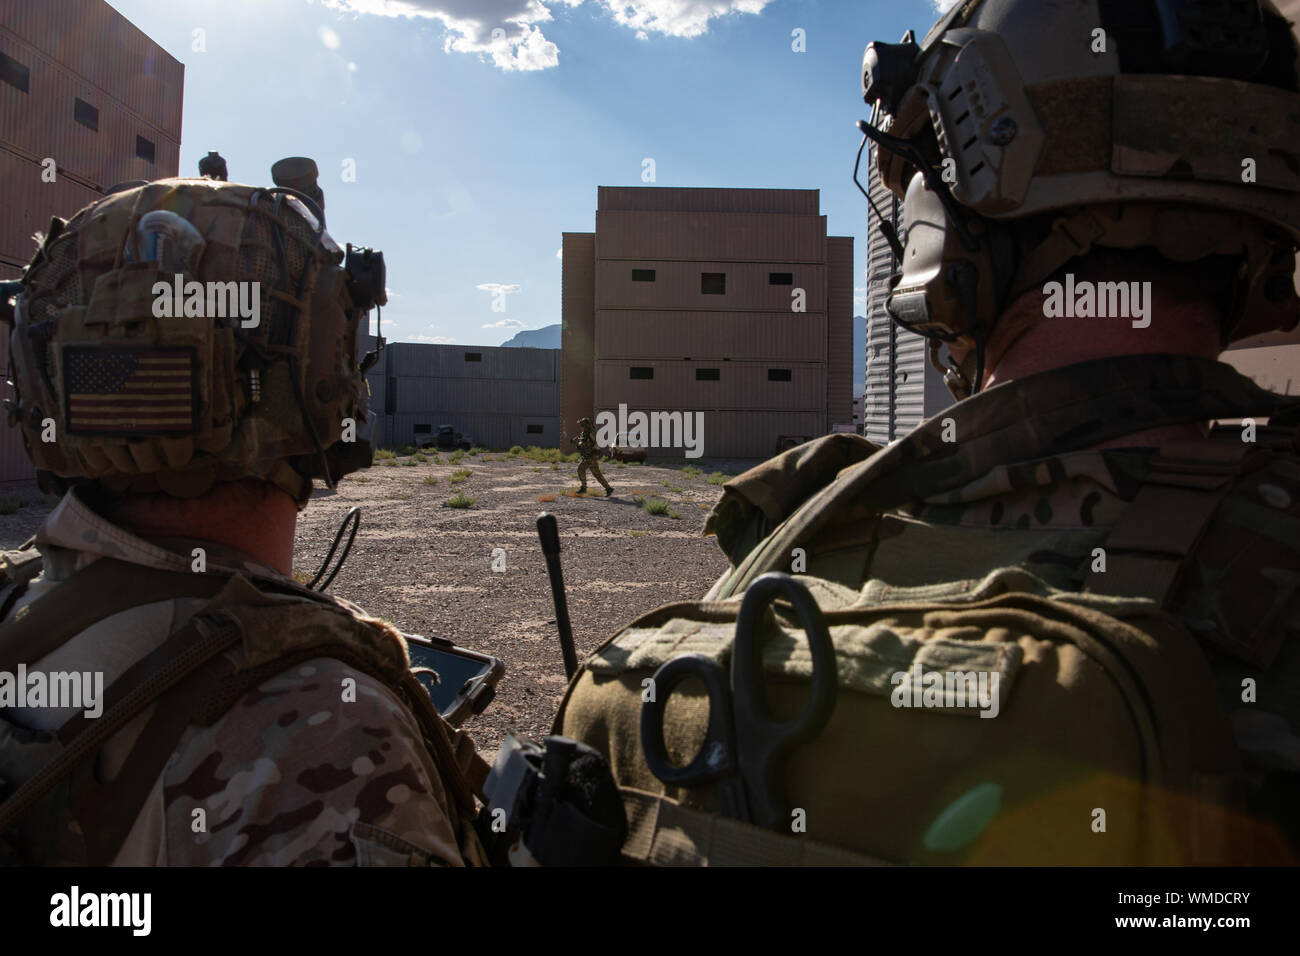 Green Berets assigned to 3rd Special Forces Group (Airborne) clear a compound during a training event near Nellis Air Force Base, Nev. Aug. 27, 2019. U.S. Special Forces and U.S. Air Force Joint Terminal Attack Controllers conducted a raid and utilized multiple weapon systems ranging from smalls arms weapons to A-10 Thunderbolt ll aircraft. (U.S. Army photo by Sgt. Steven Lewis) Stock Photo